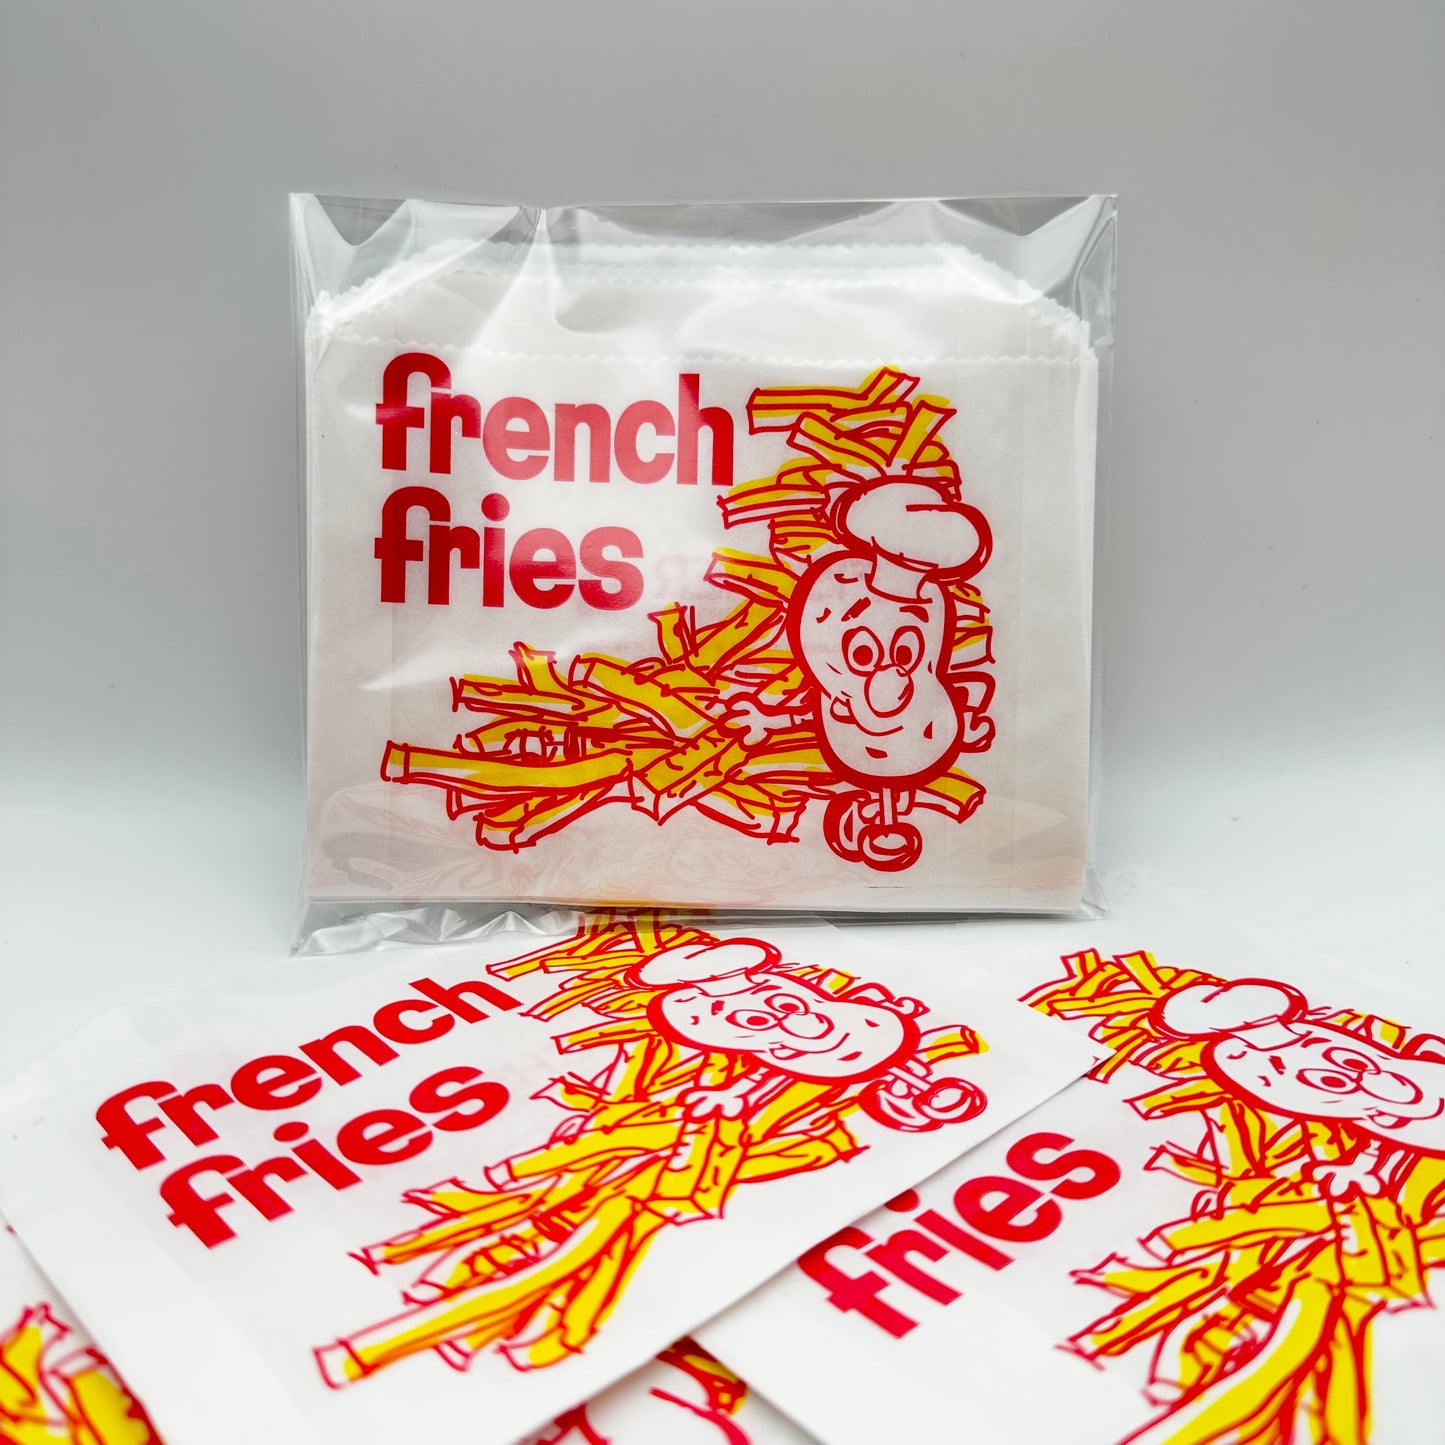 French Fries bag with a potato wearing a chef's gat standing in front of a pile of fries.